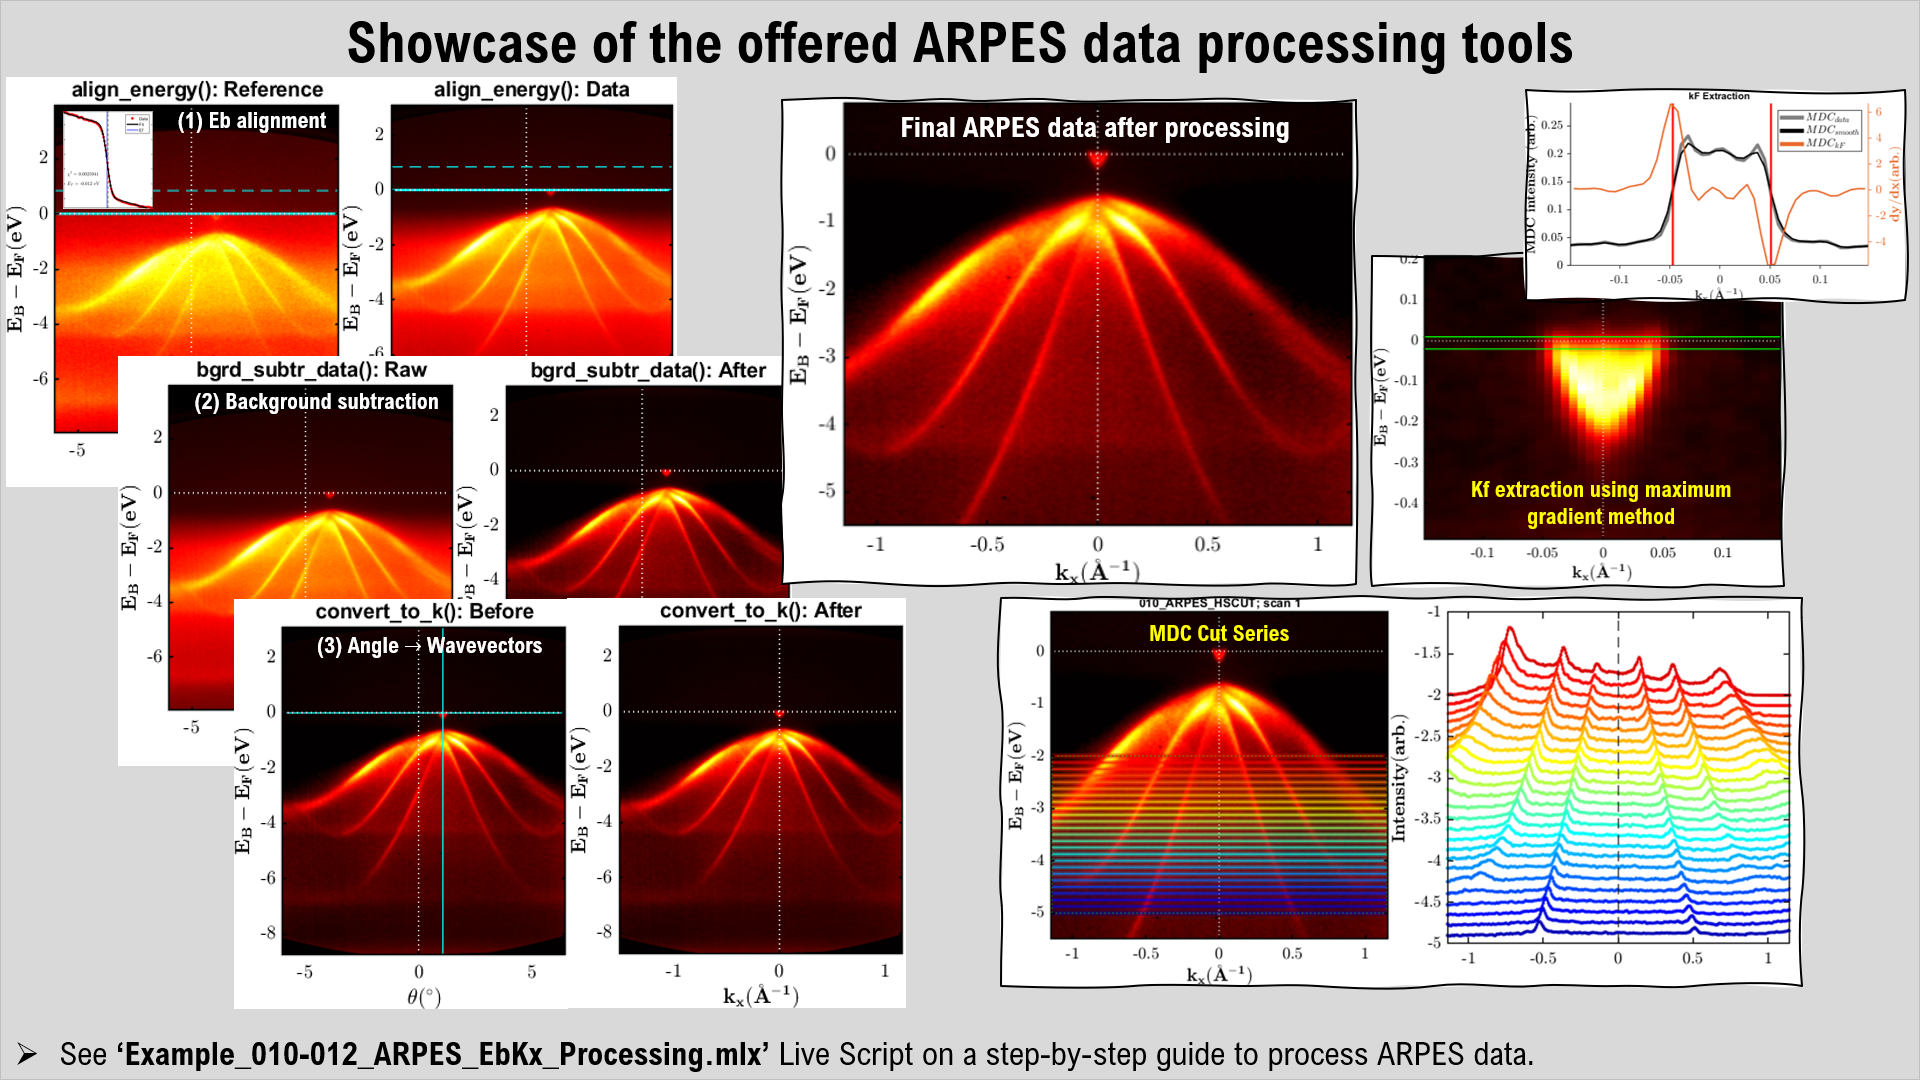 013_ARPES_2D_Data_Processing